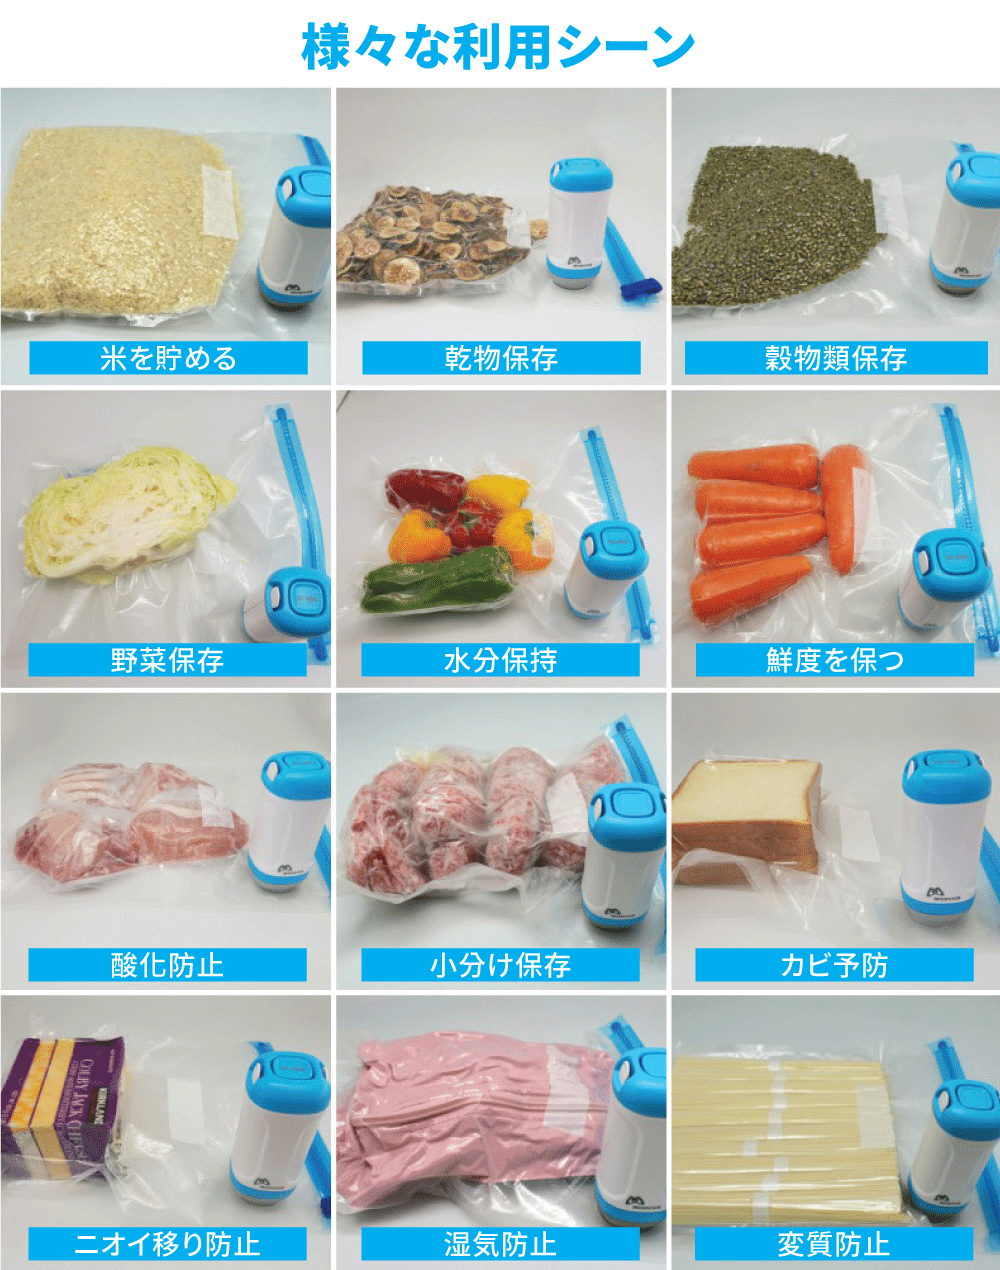 DR. SAVE UNO Handheld Vacuum Sealer can help you to store any foods.